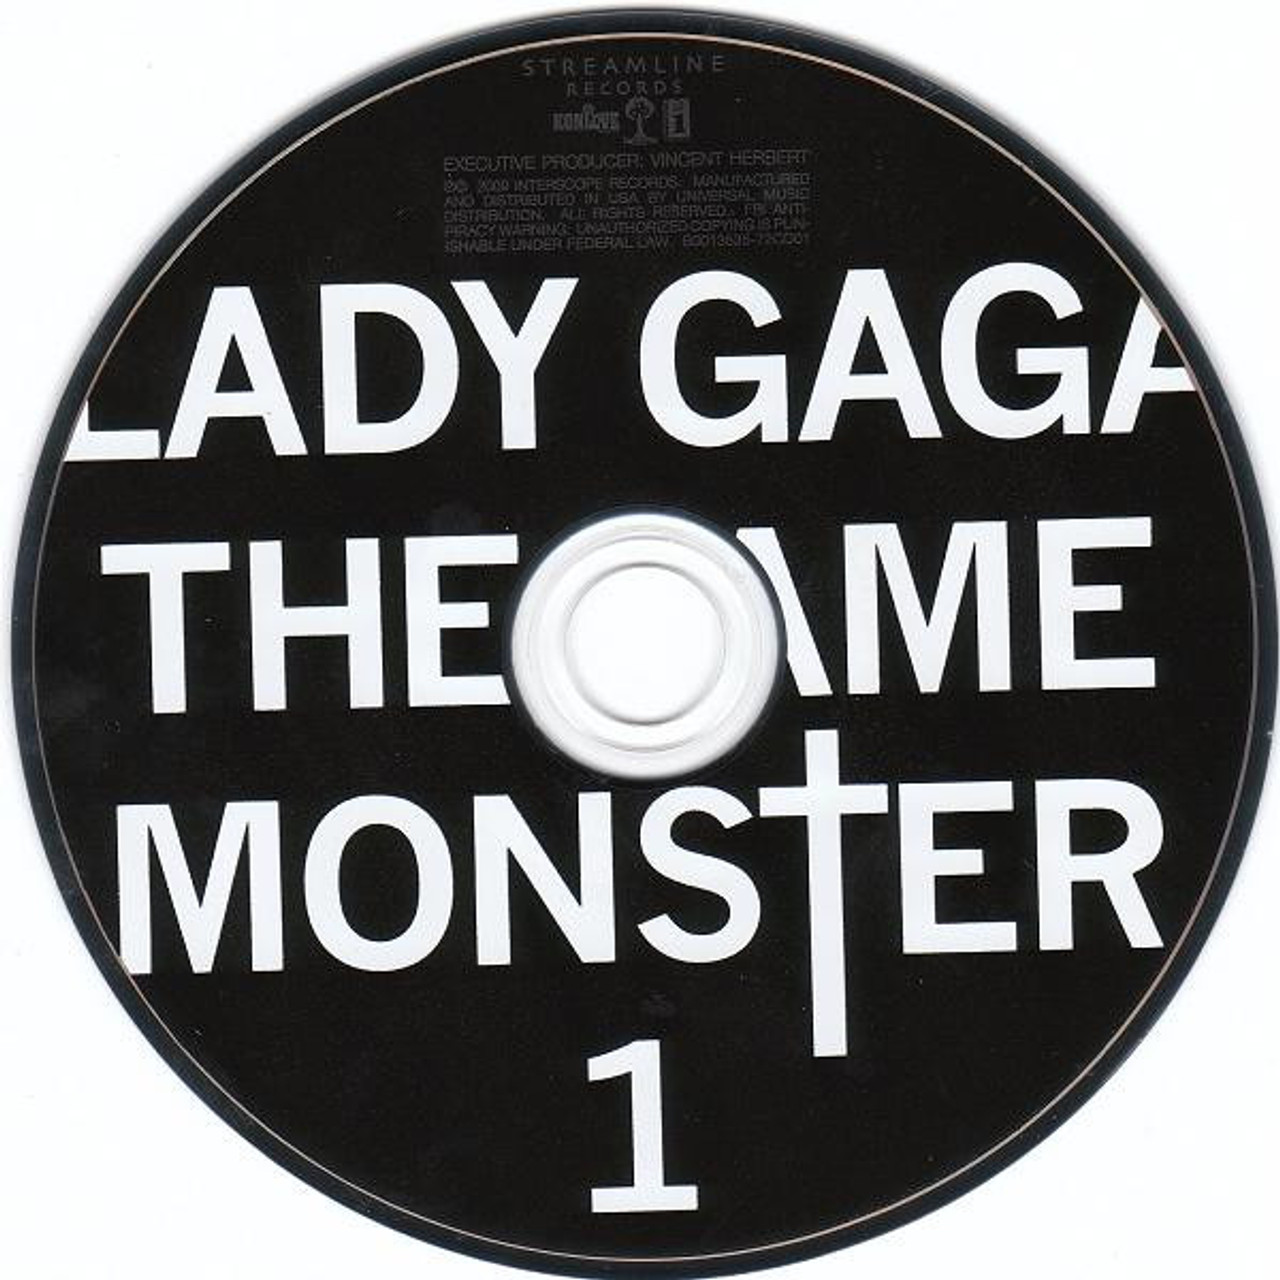 USED* THE FAME MONSTER - LADY GAGA (#602527210360) - Omega Music